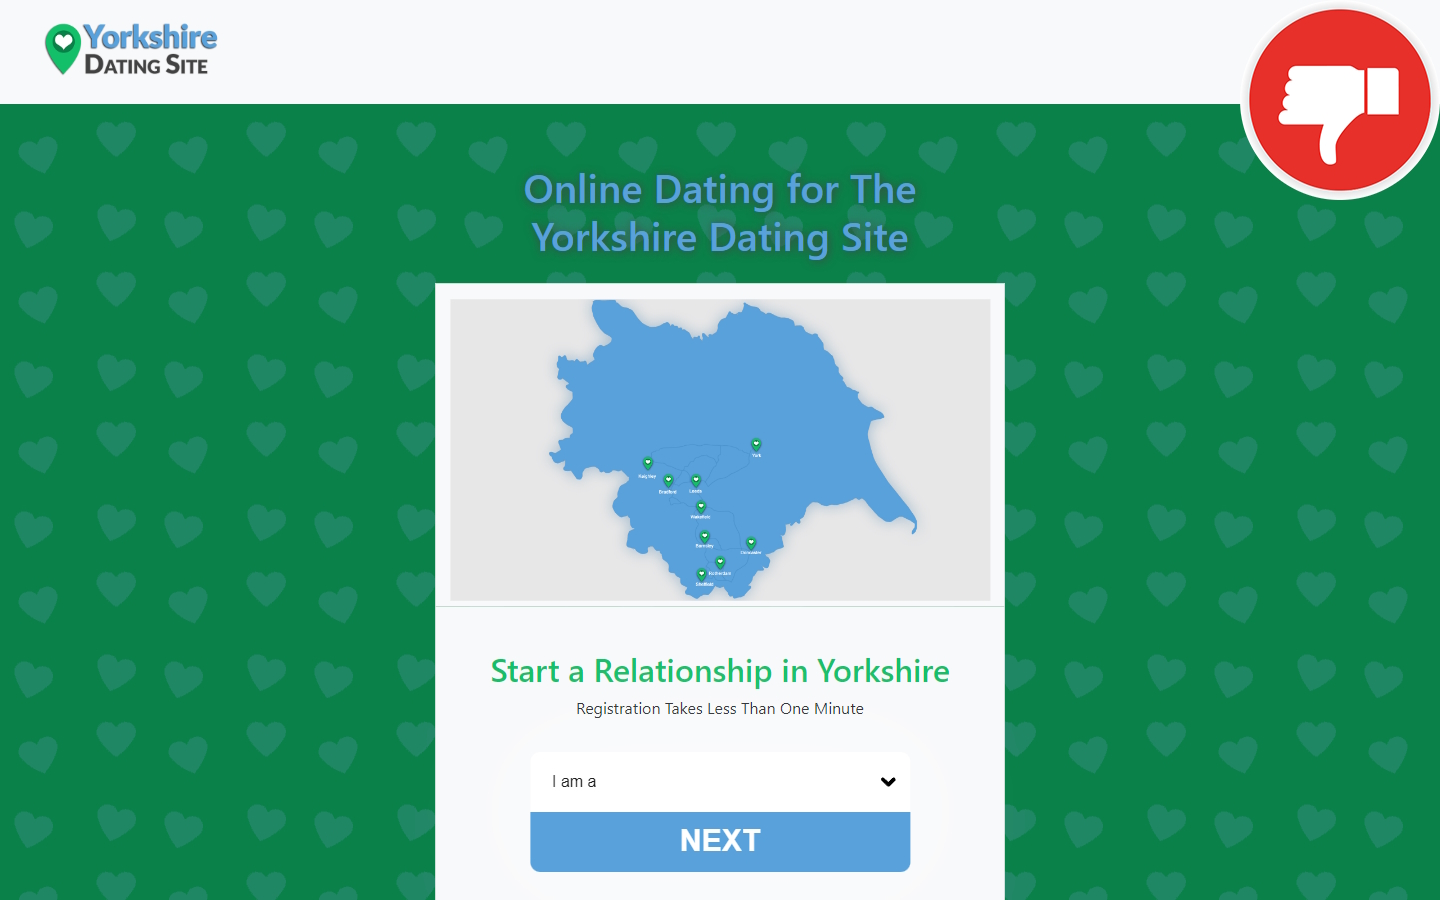 Review YorkshireDatingSite.co.uk Scam